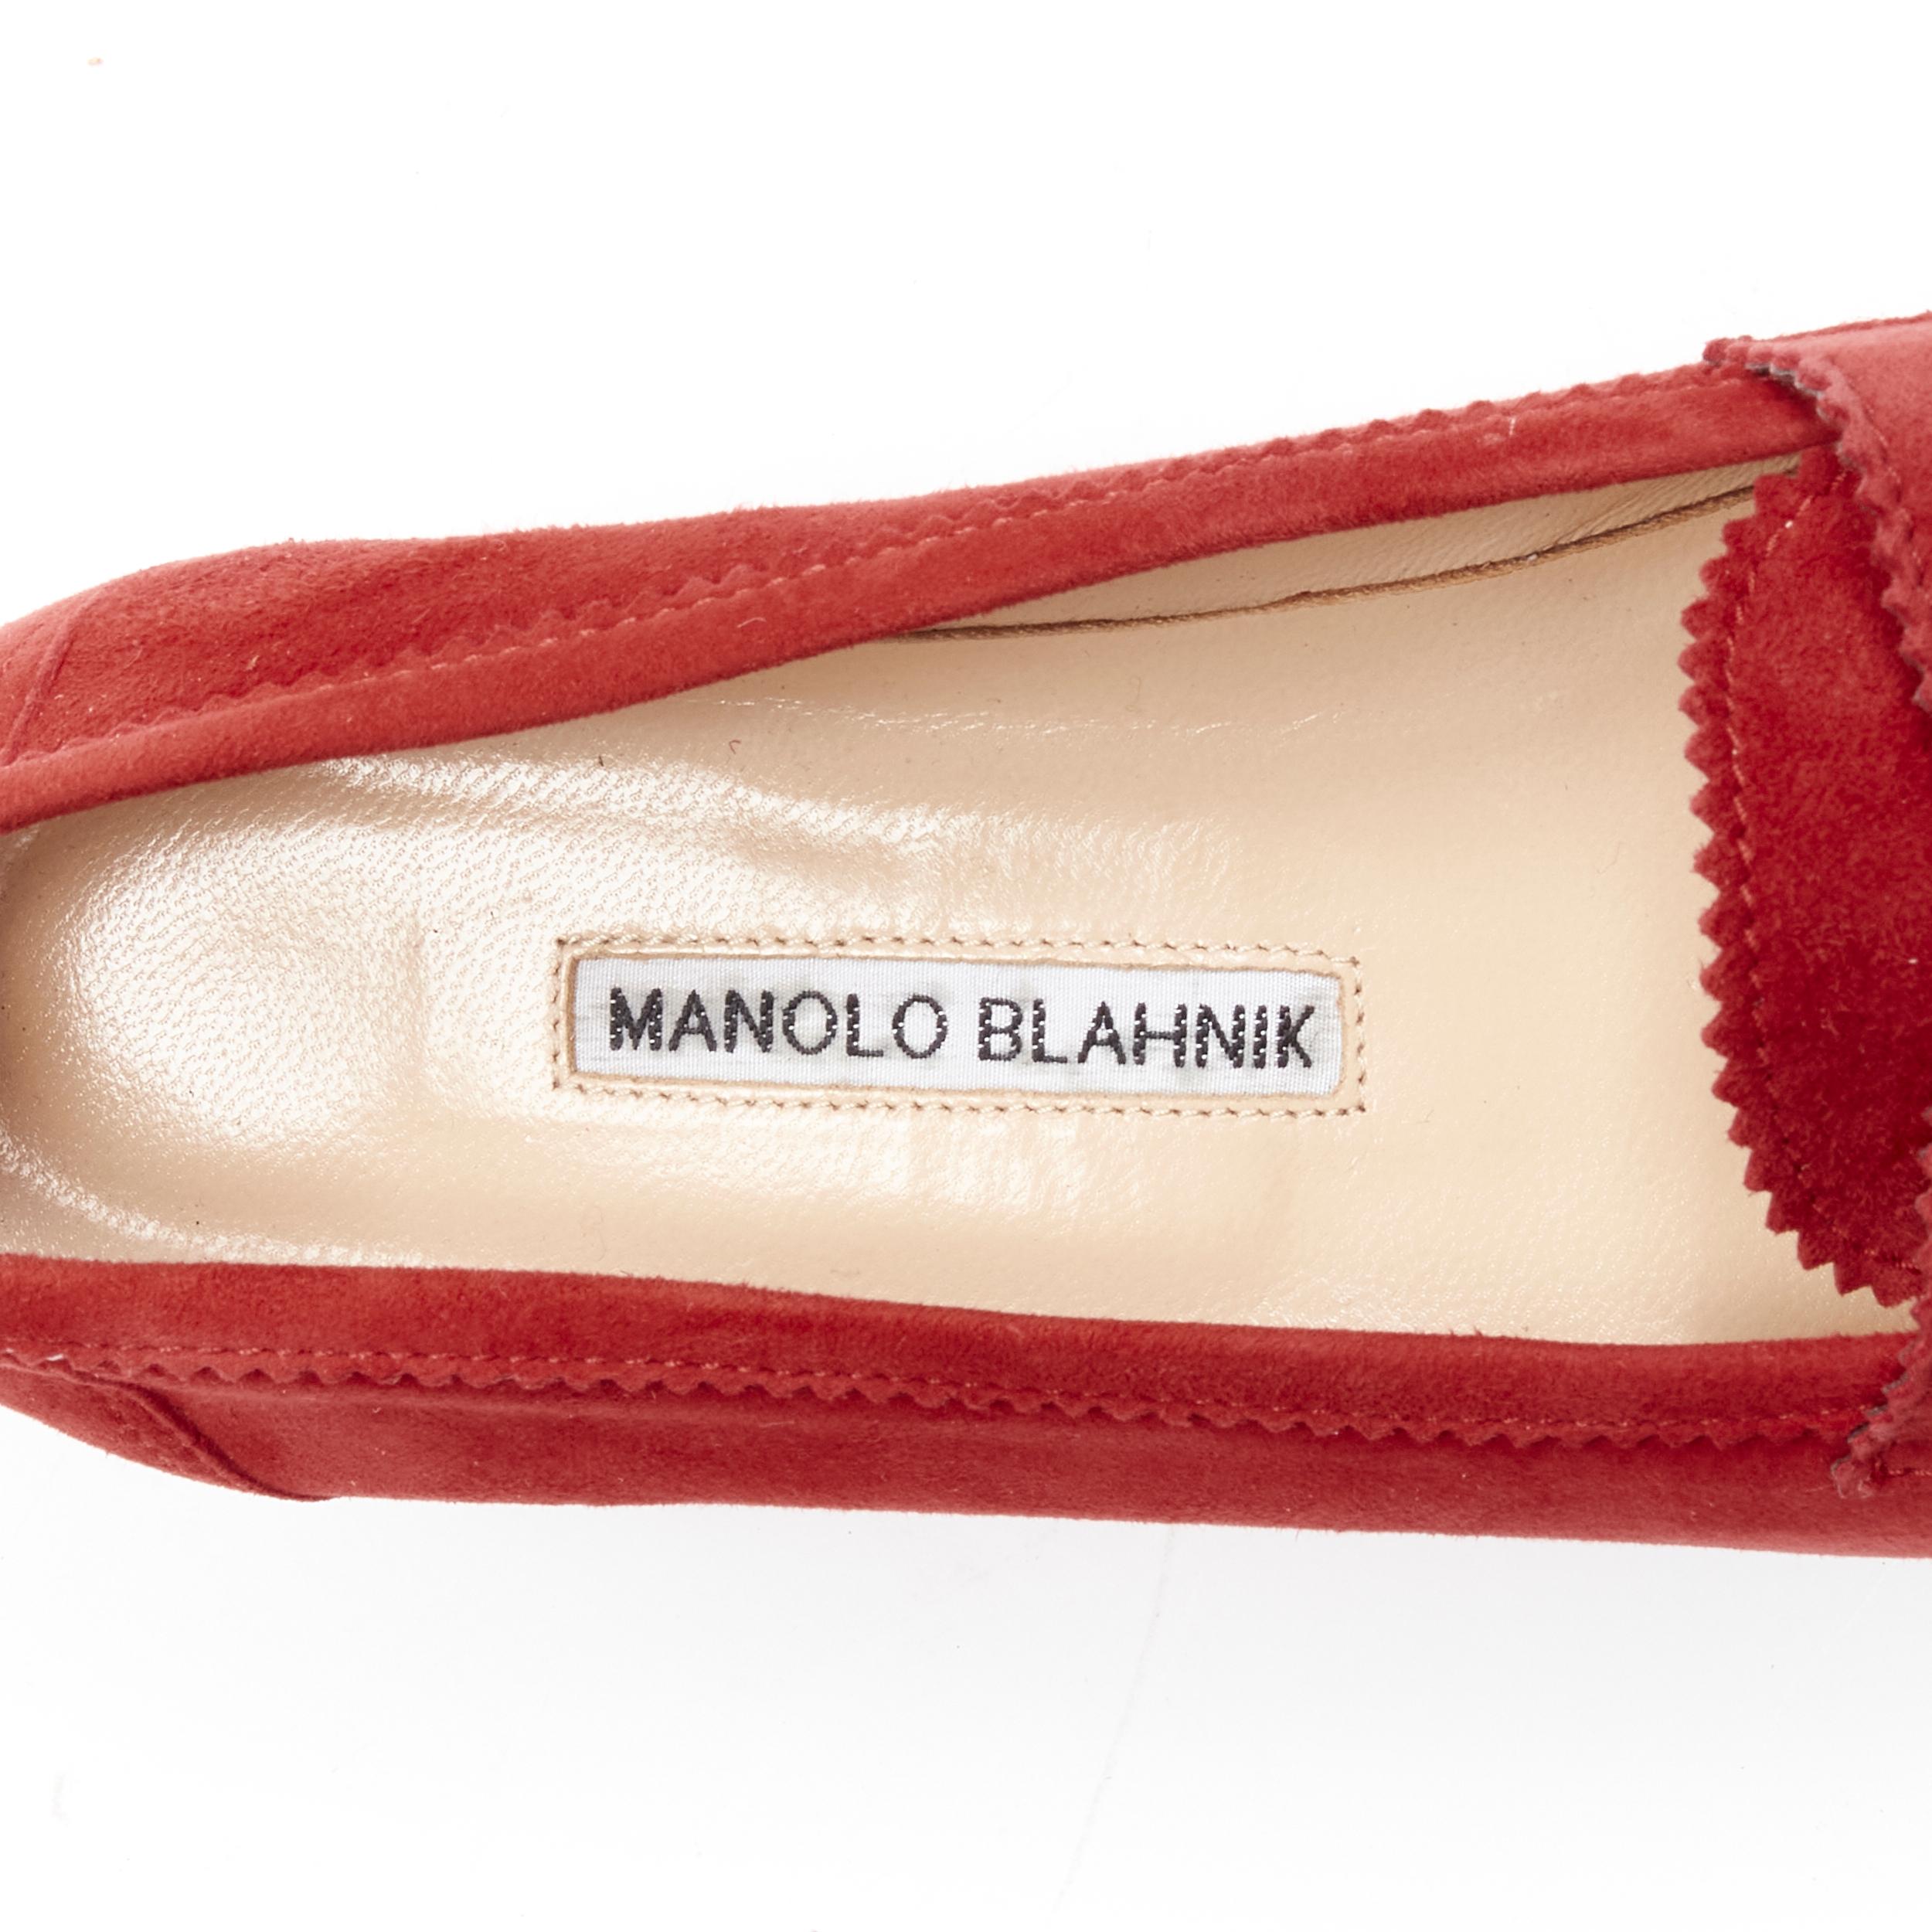 MANOLO BLAHNIK red suede leather classic penny loafer EU37 For Sale 4